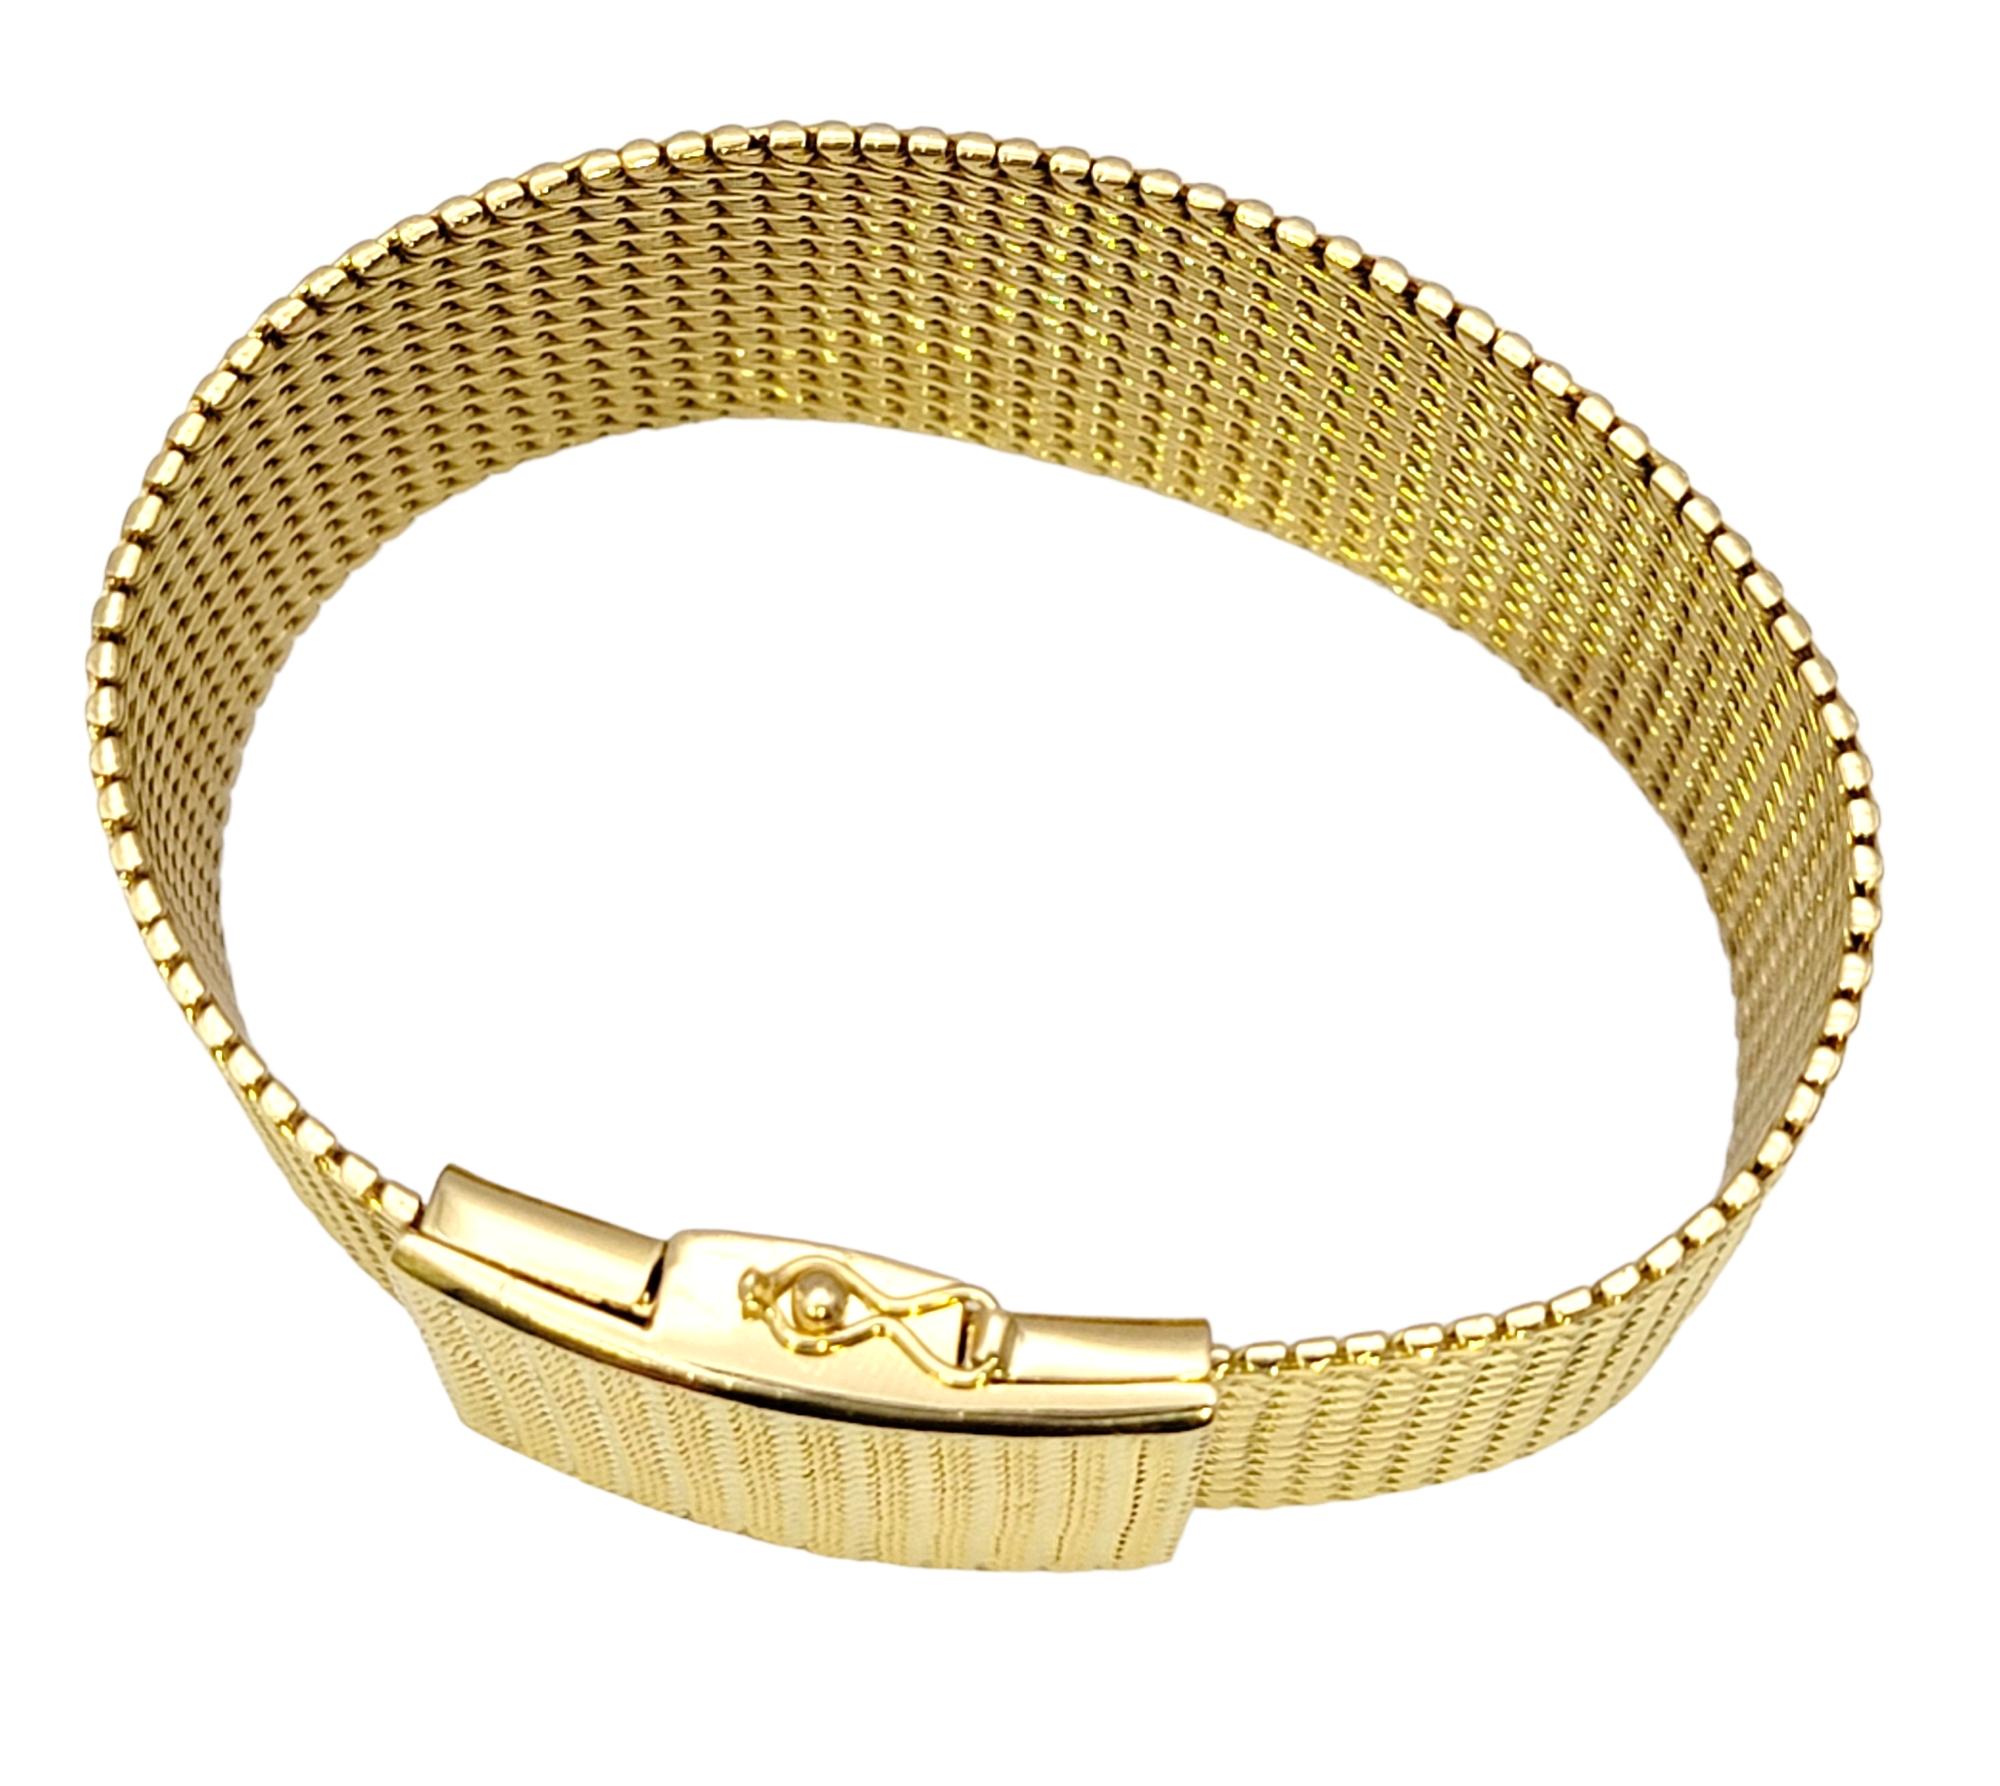 Contemporary Vintage Textured 18 Karat Yellow Gold Wide Mesh Bracelet with Big Square Clasp For Sale